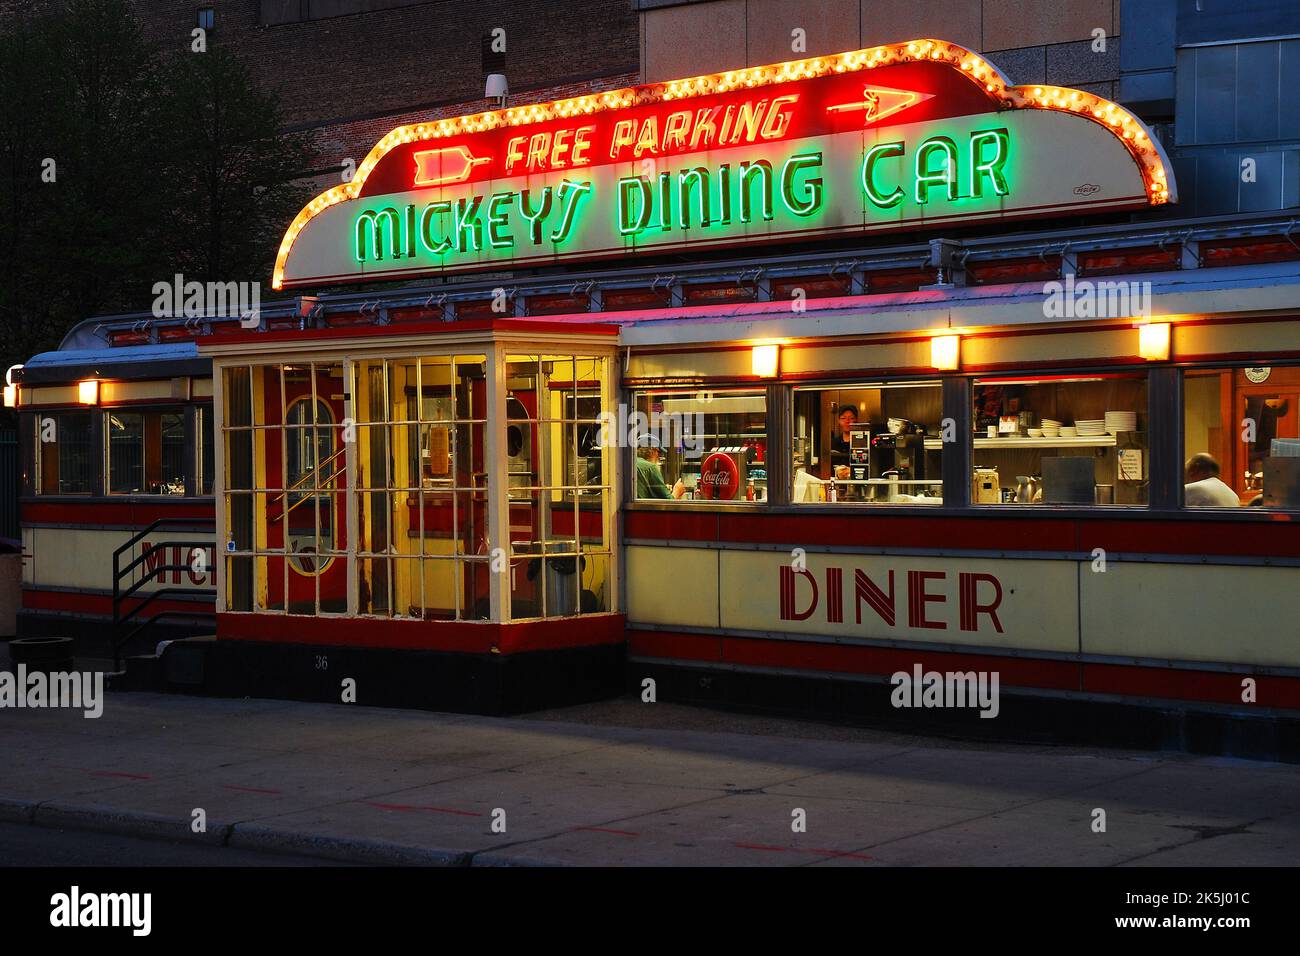 Mickey's Dining Car restaurant, a prefabricated Jerry O'Mahoney Diner, is illuminated with bright neon lights at night in St Paul, Minnesota Stock Photo